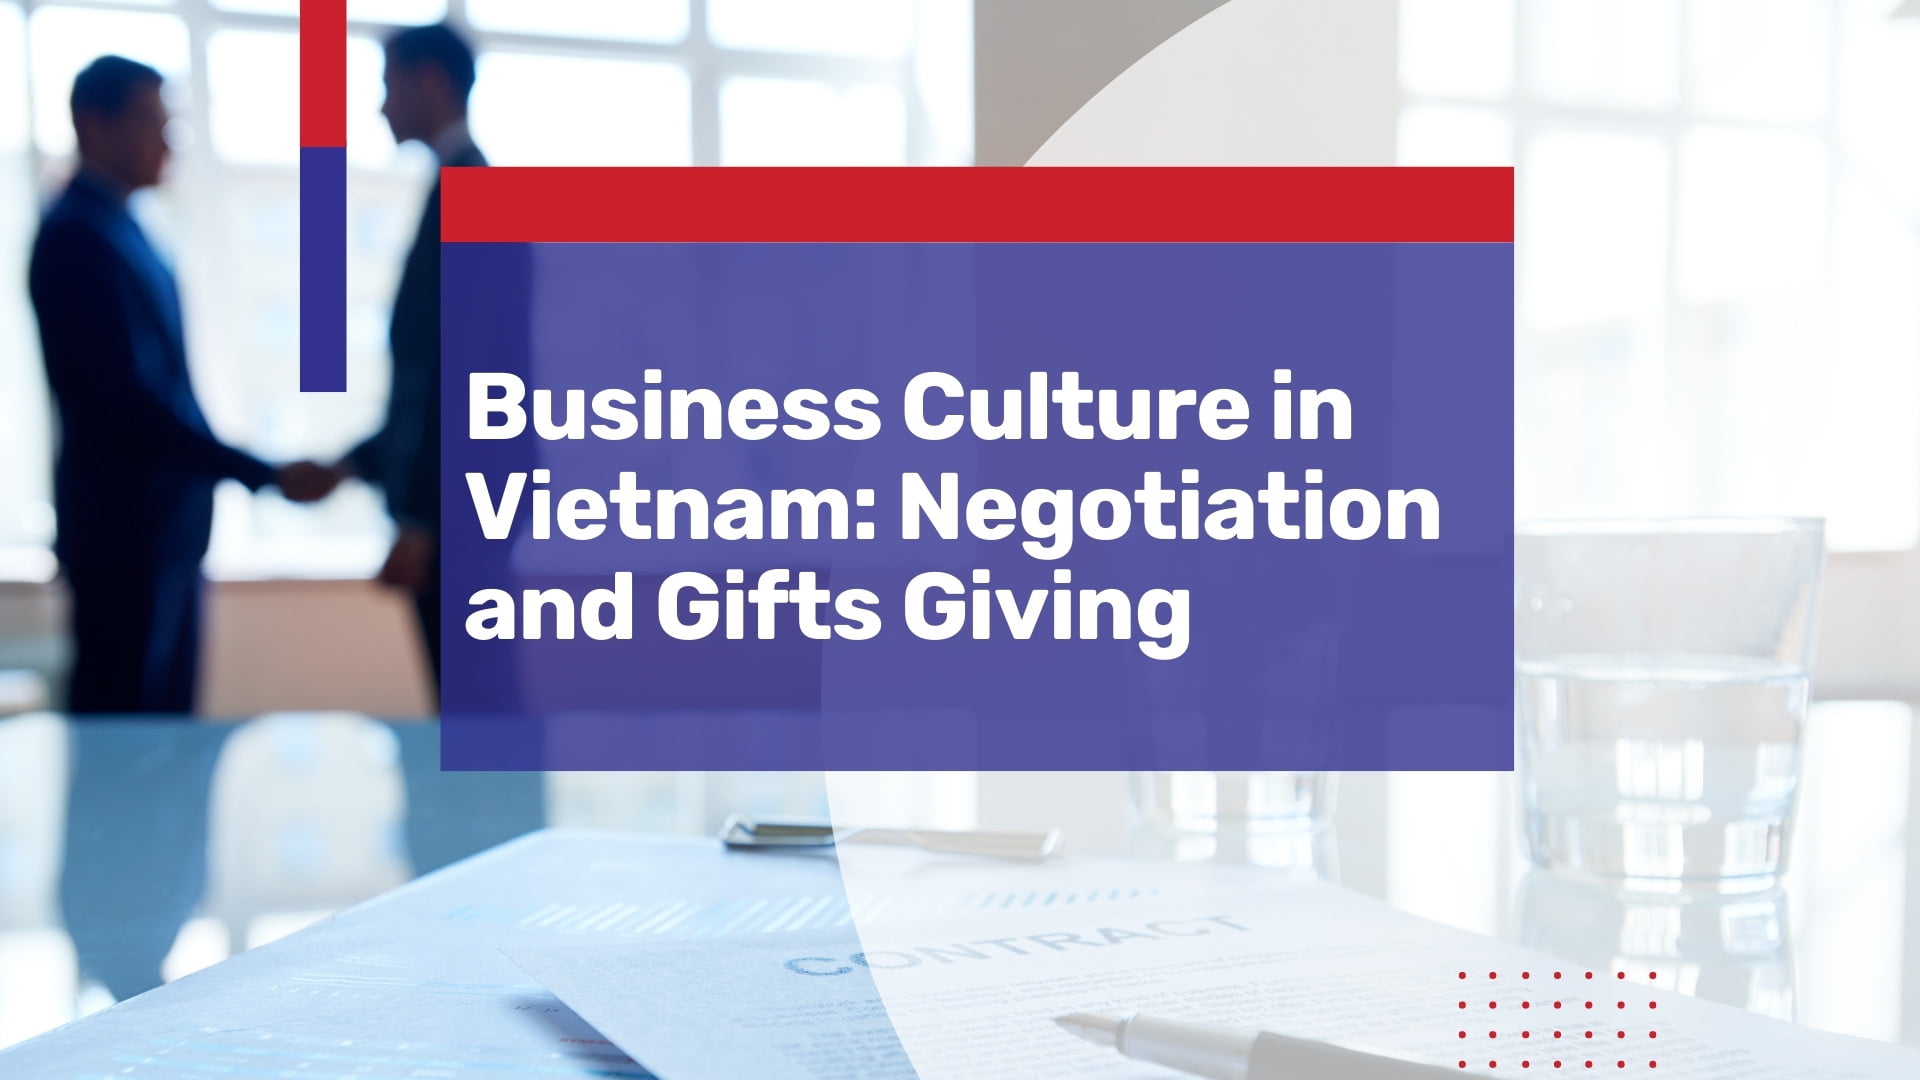 Business Culture in Vietnam: Succeeding with Negotiations and Gift Giving